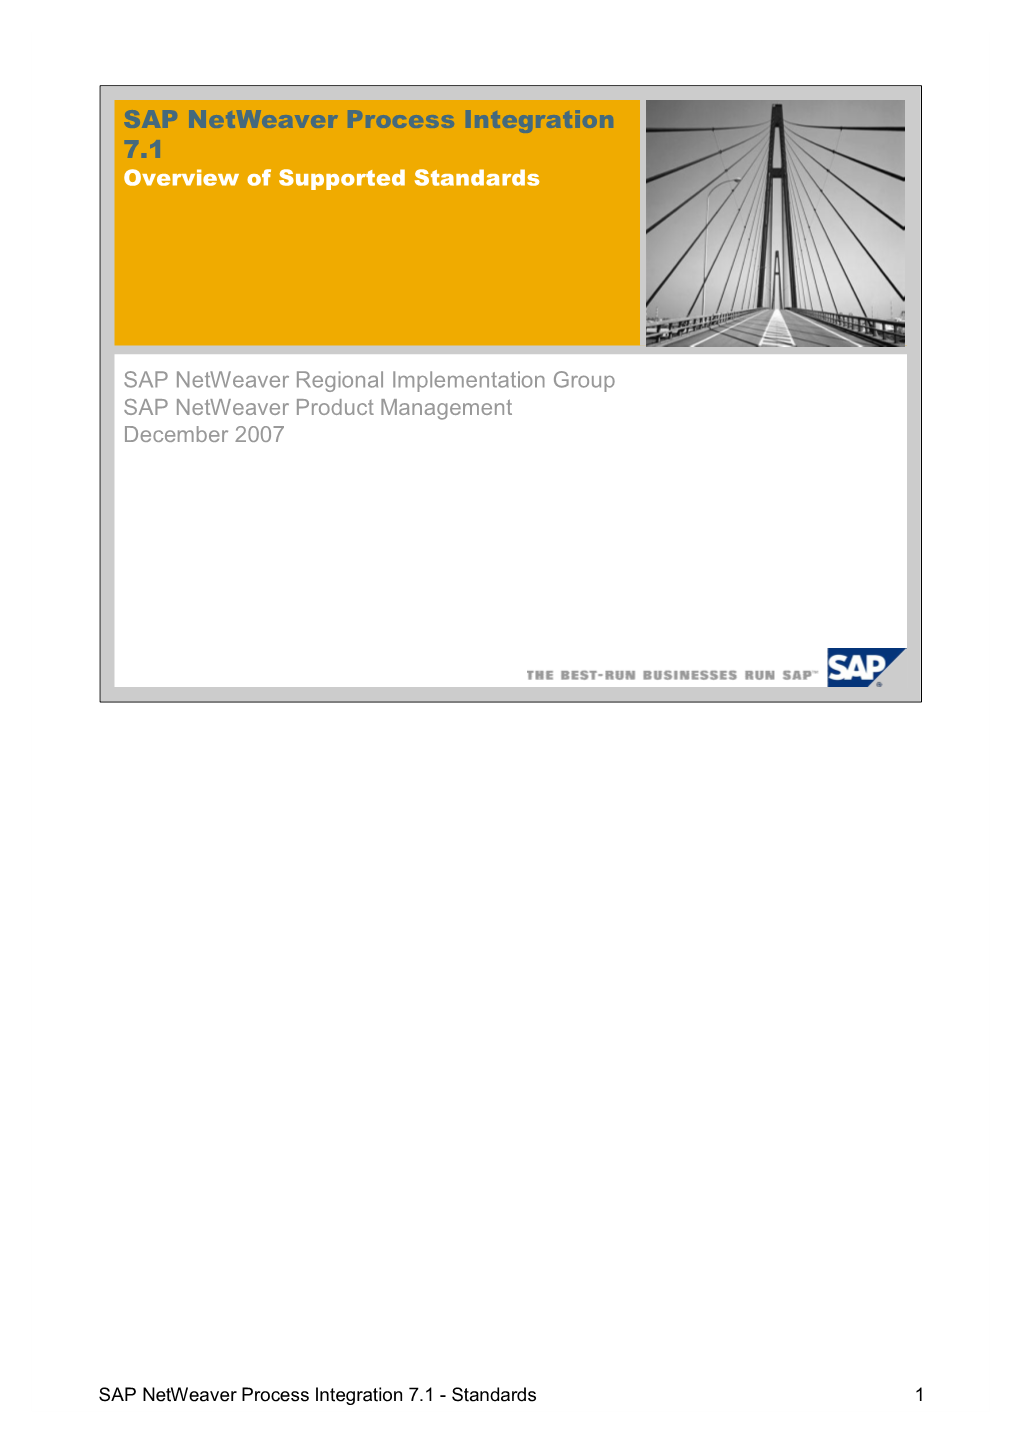 SAP Netweaver Process Integration 7.1 Overview of Supported Standards